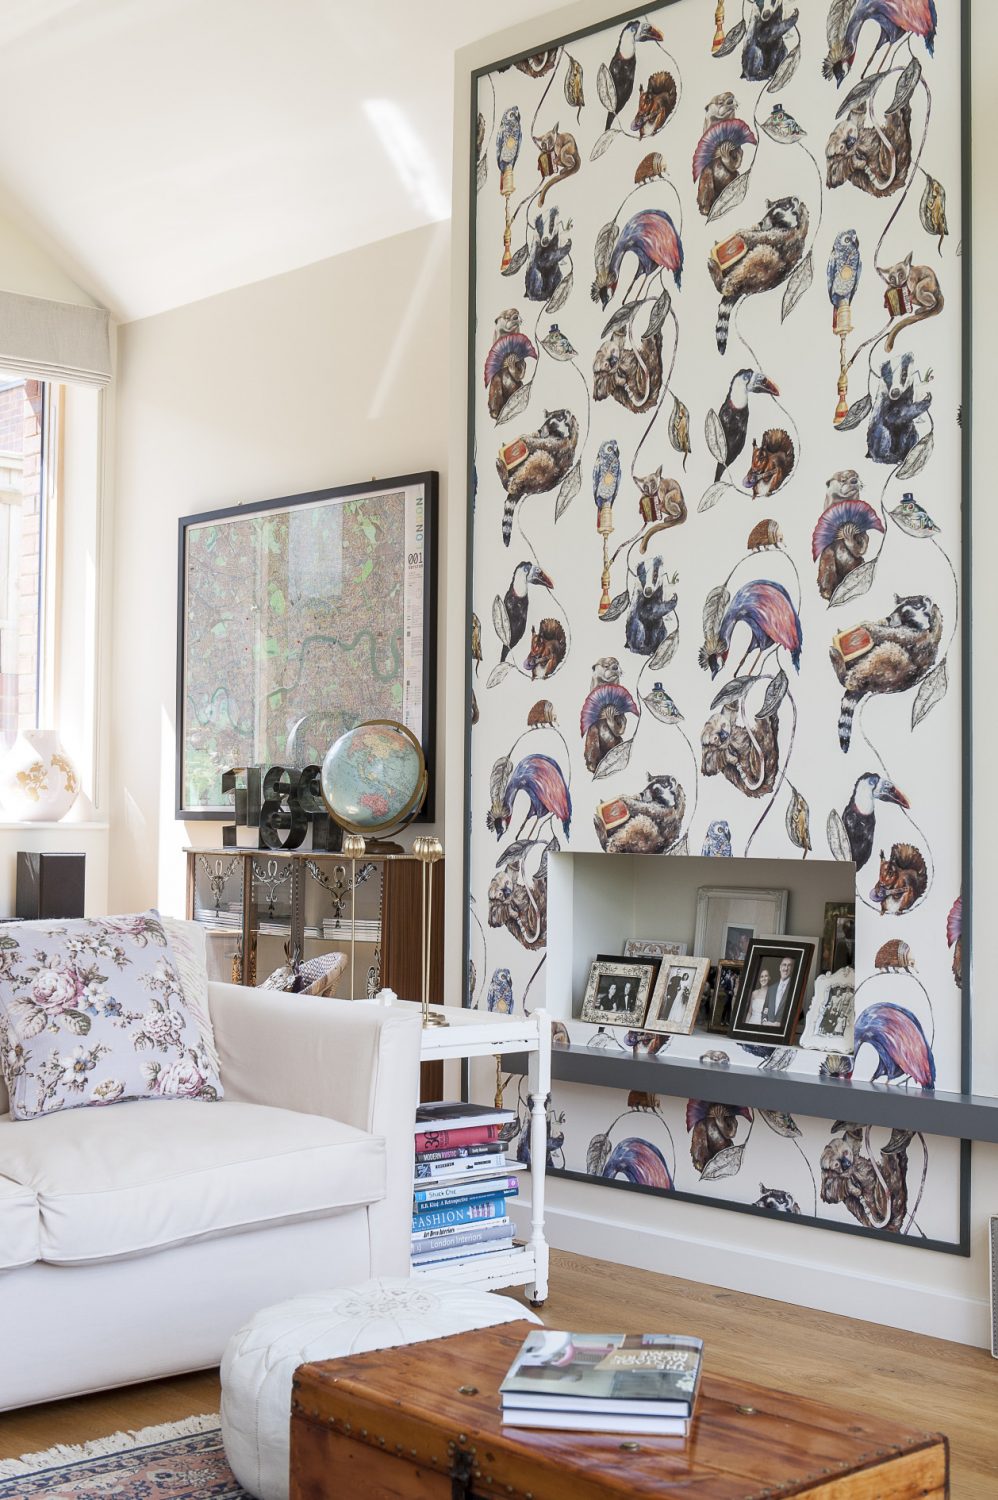 The chimney breast papered entirely in House of Hackney ‘Empire’ features a variety of critters enjoying themselves, among them a hookah-smoking sloth, a frog in a bowler hat, a fanning otter and an imbibing badger